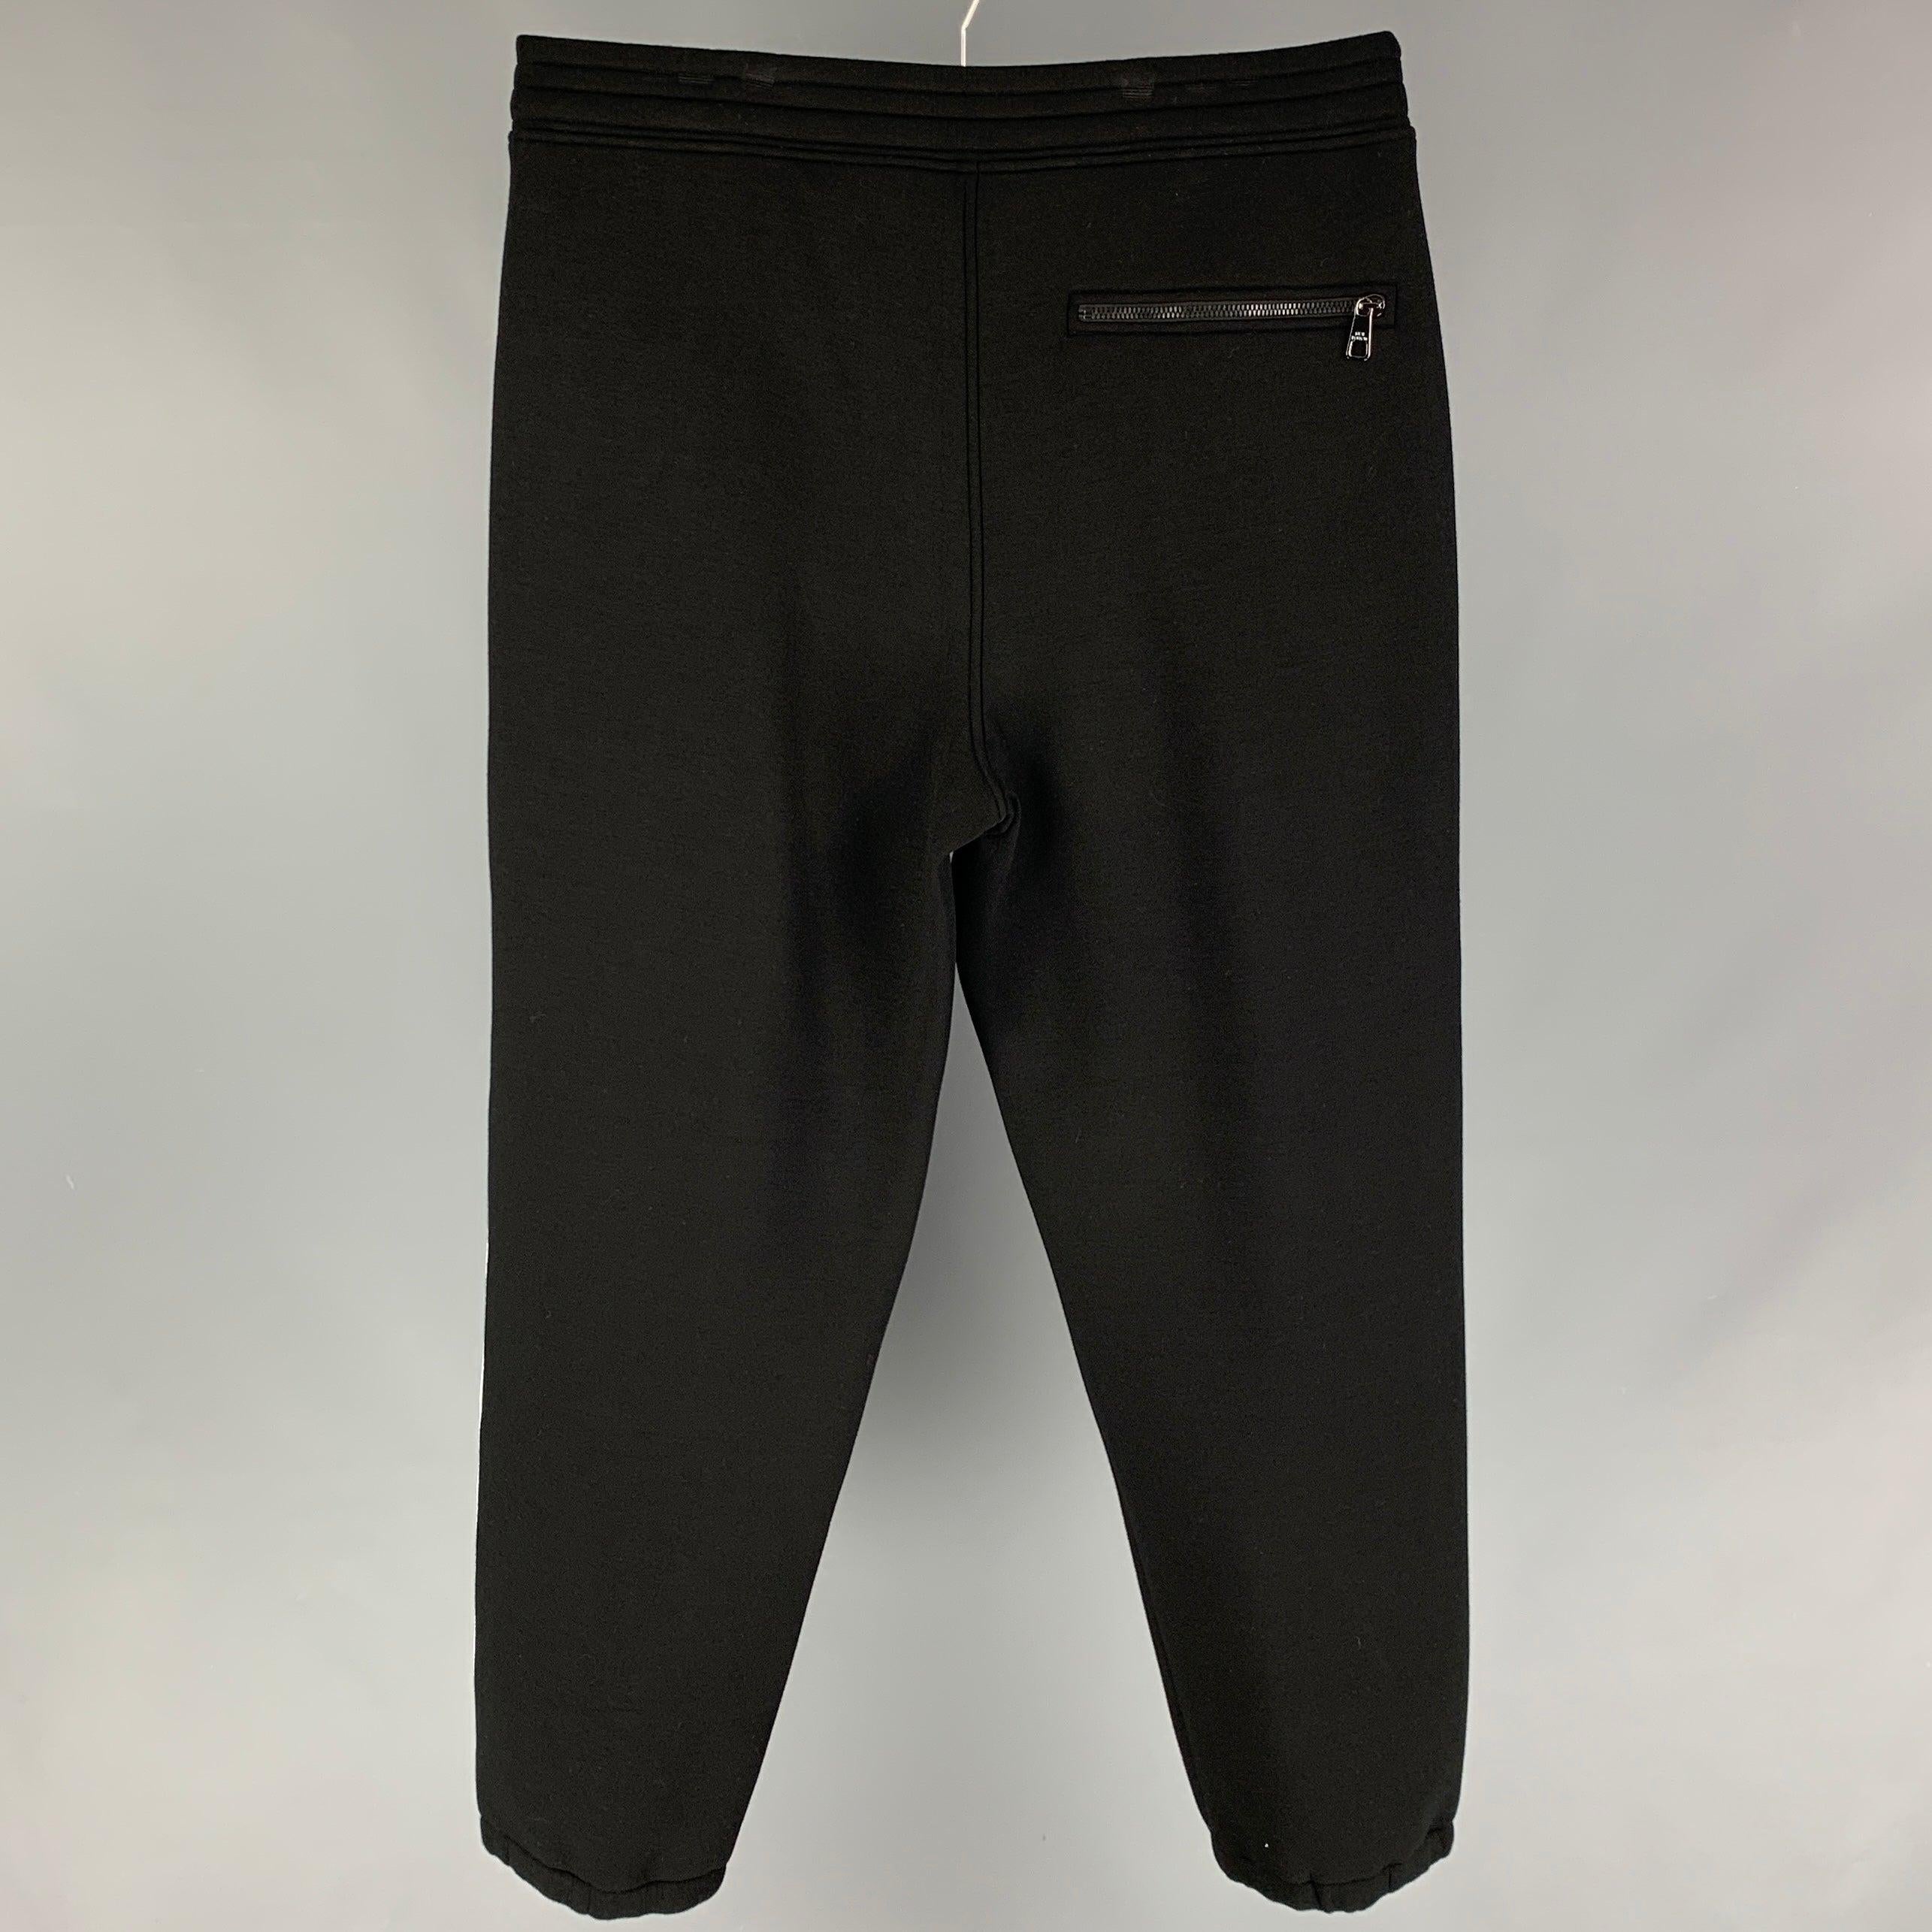 NEIL BARRETT sweat pants comes in a black & white viscose with a side stipe featuring a easy fit, leather patch detail, and a elastic waistband.
New With Tags. 

Marked:   XL  

Measurements: 
  Waist: 36 inches  Rise: 14.5 inches  Inseam: 30 inches